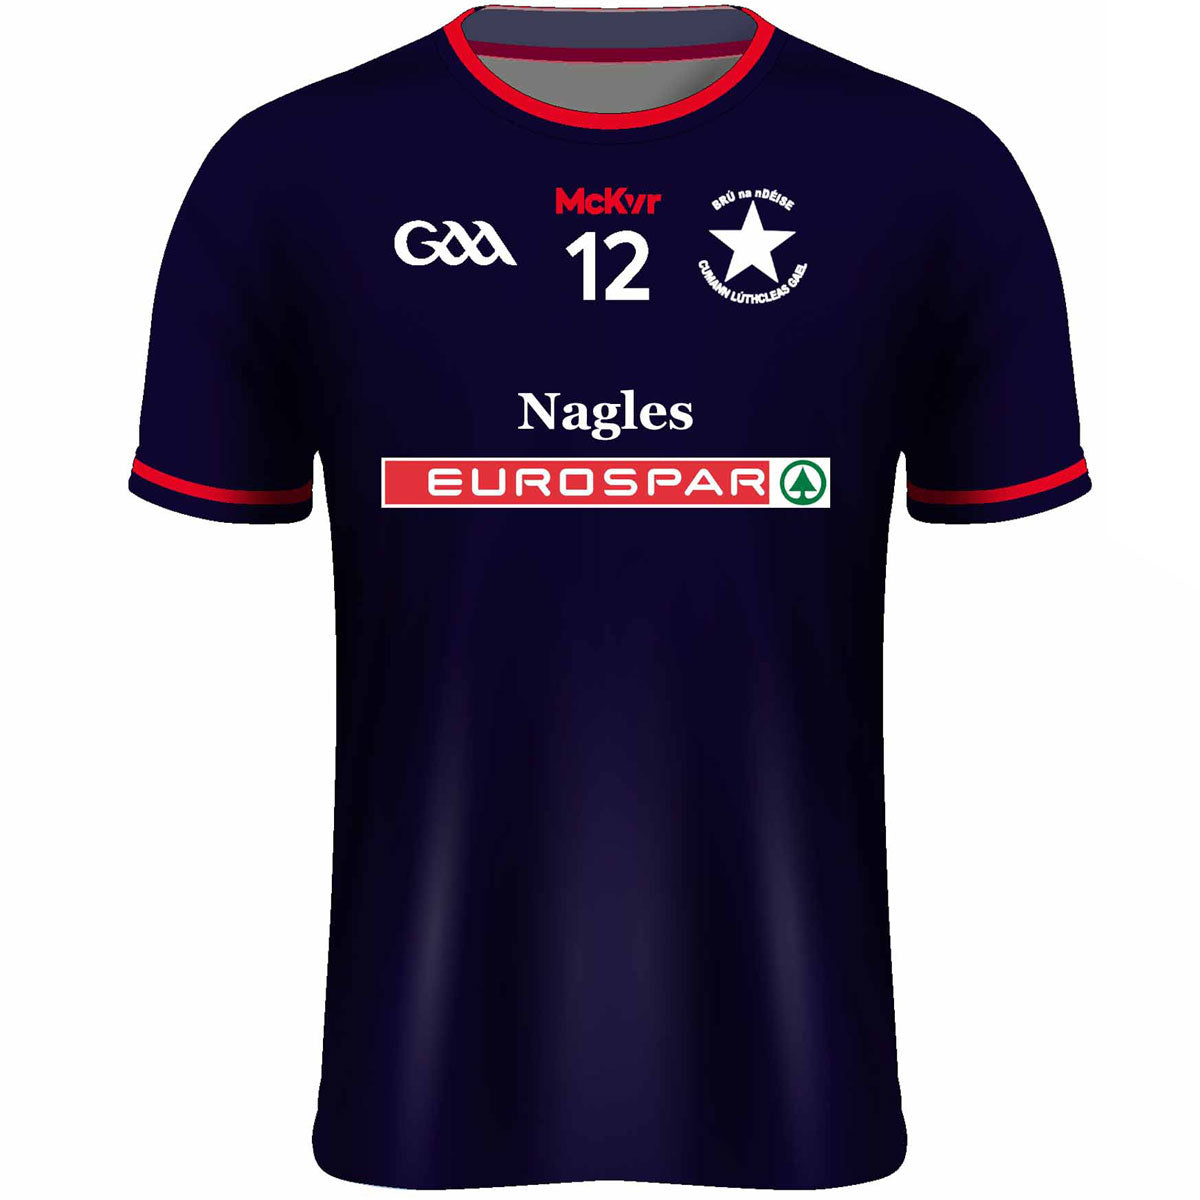 Mc Keever Bruff GAA, Limerick Numbered Playing Jersey - Womens - Navy